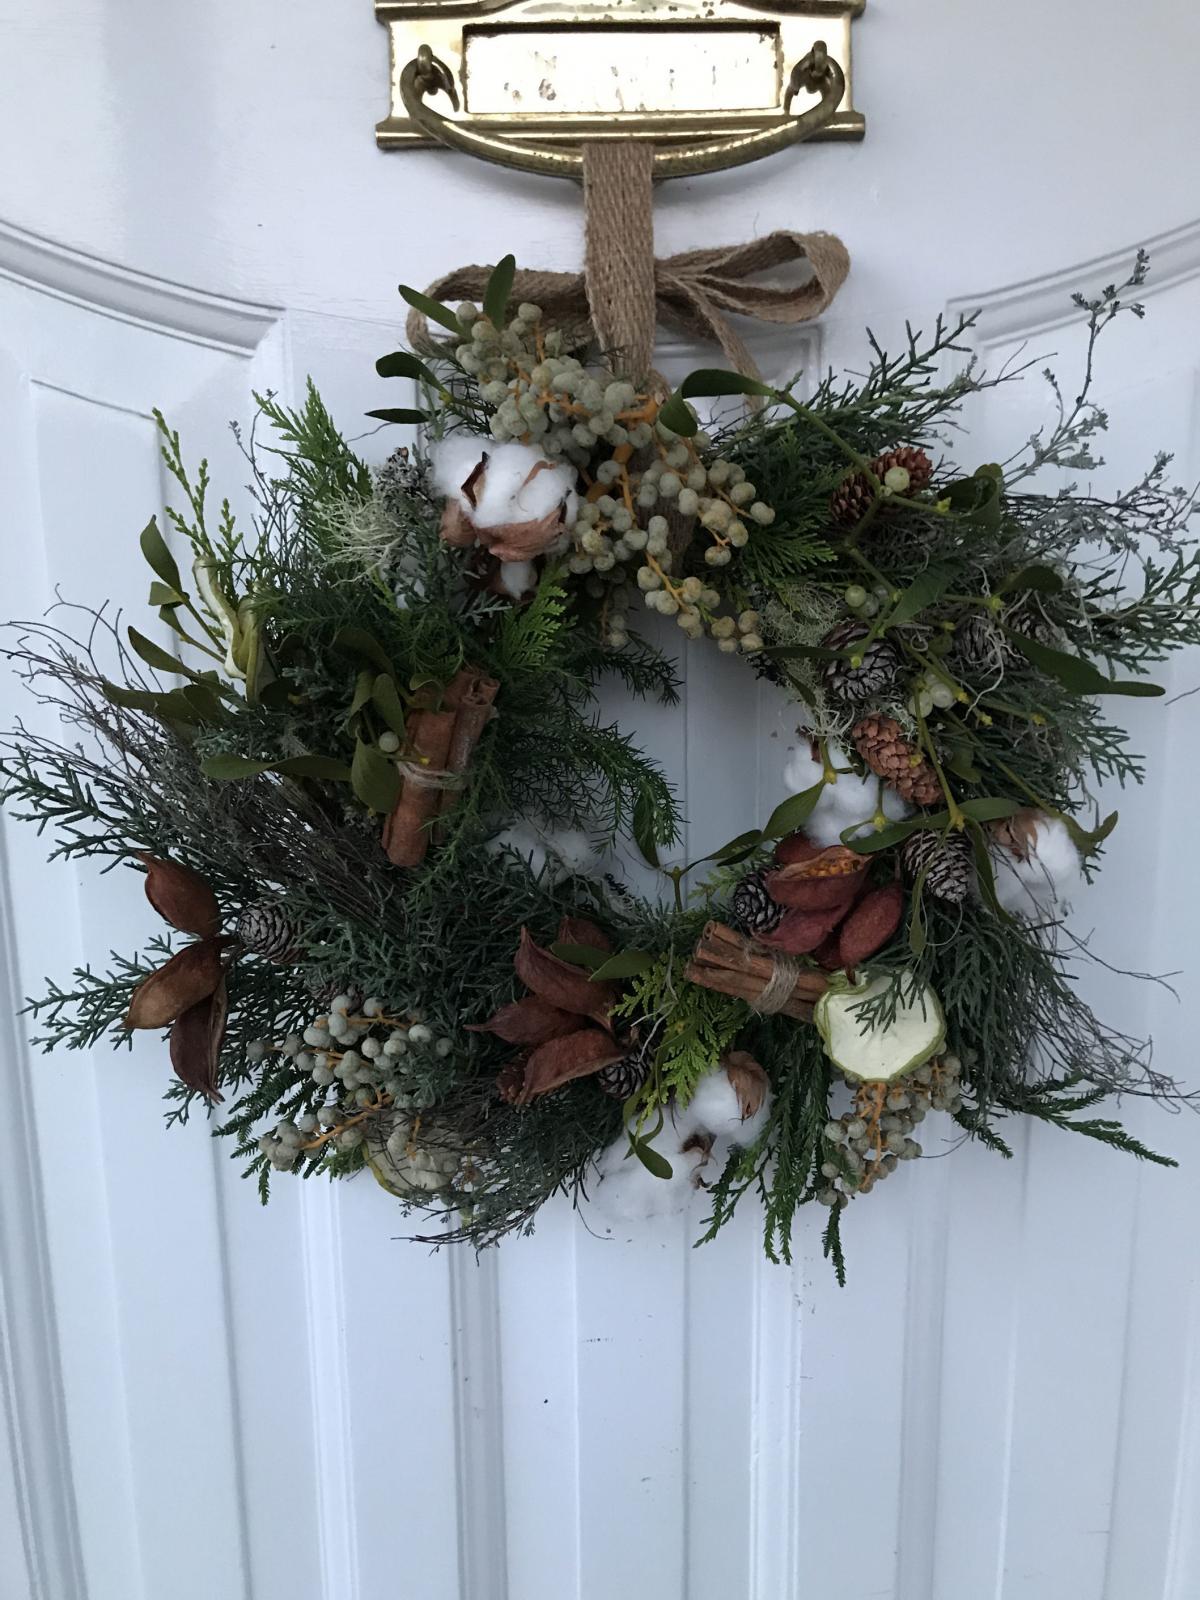 How to make your own sustainable Christmas wreath